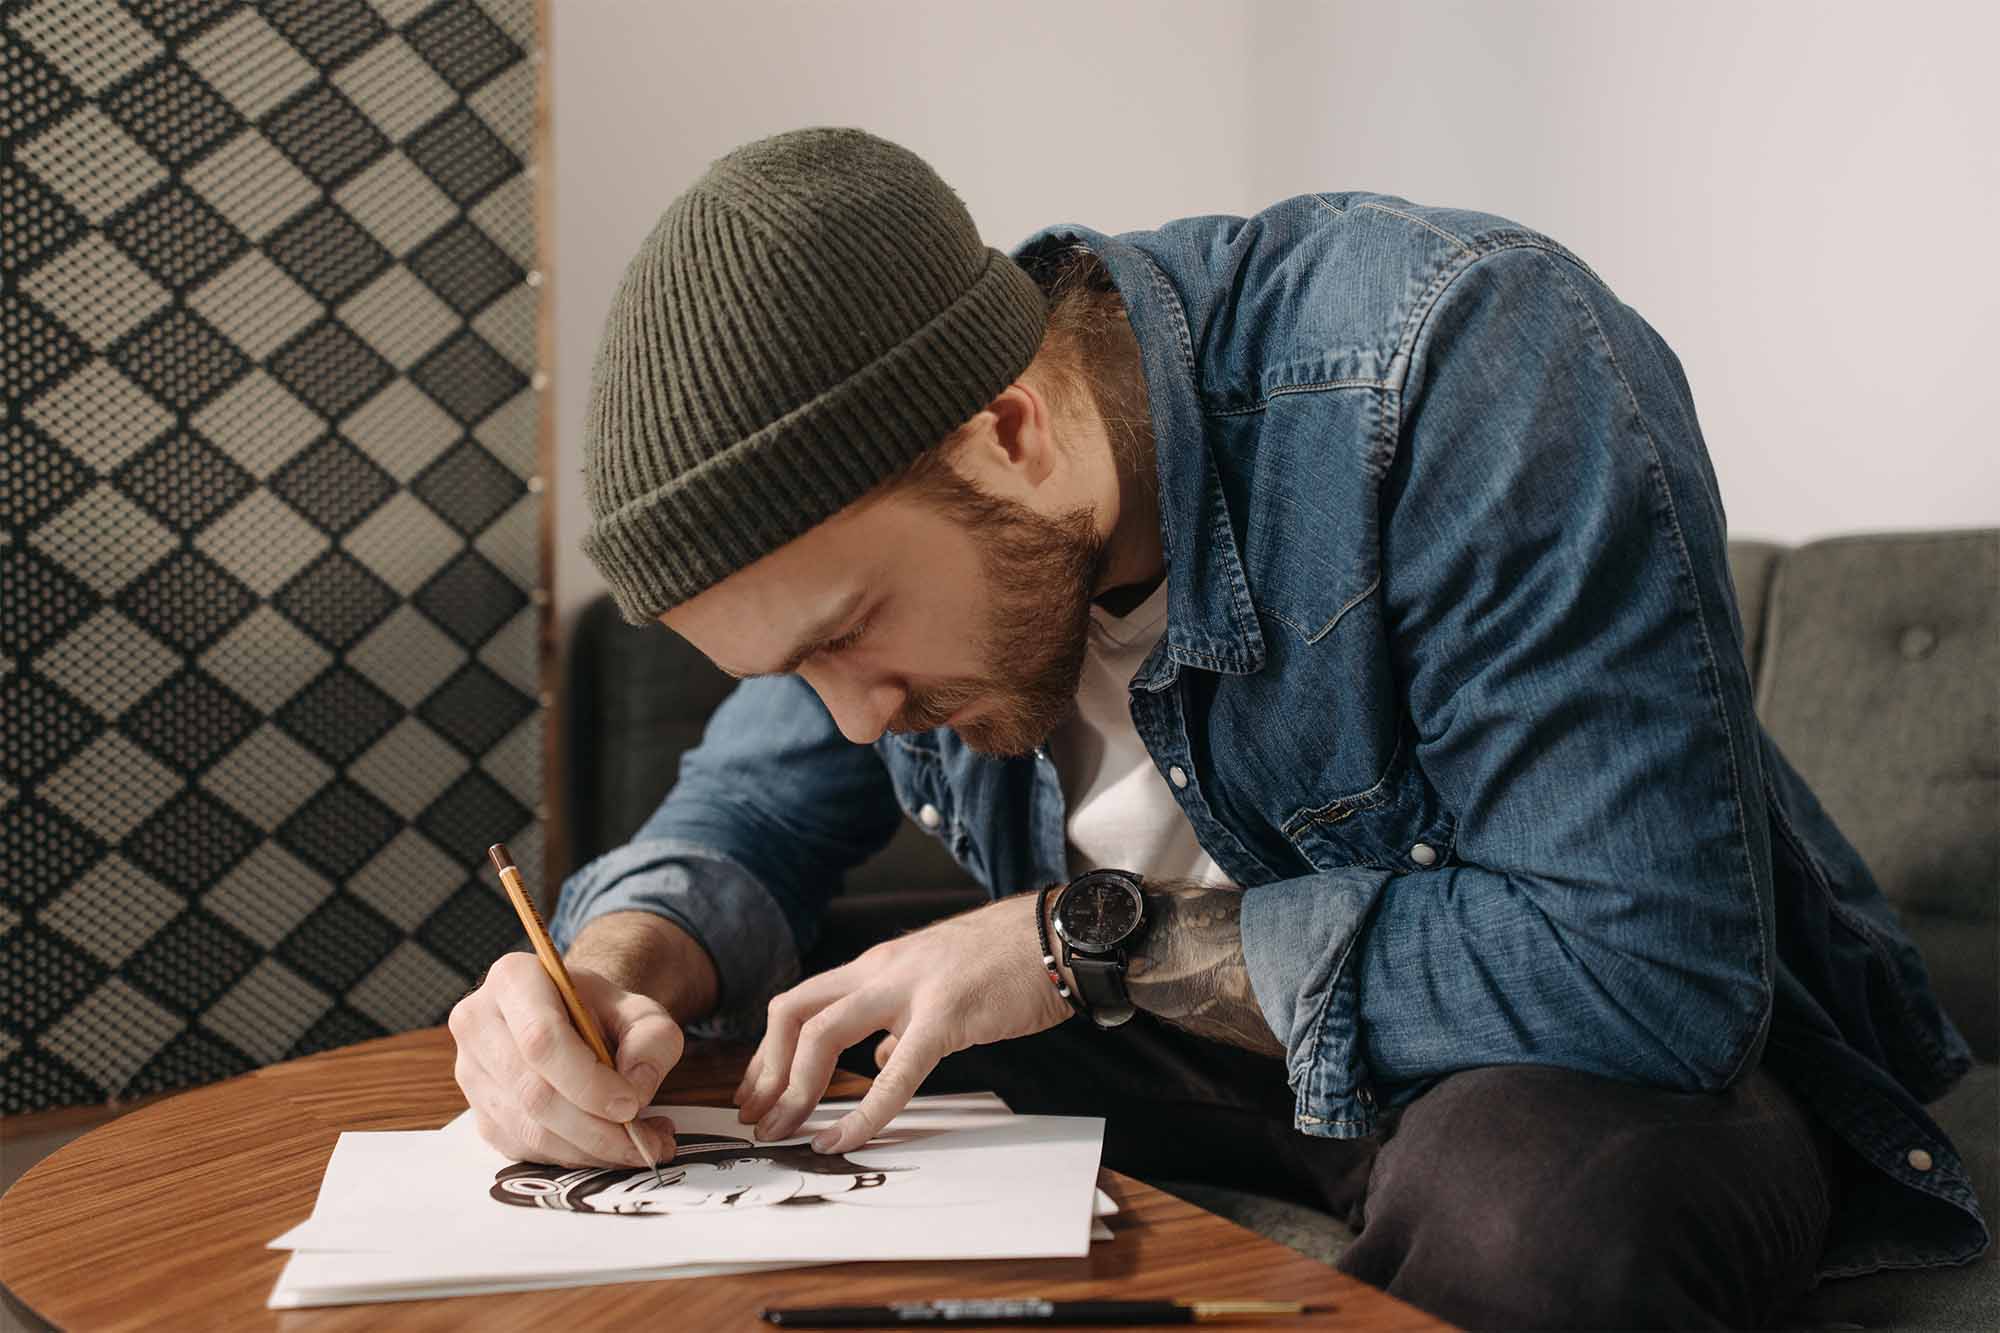 Bearded-man sitting on a couch, slouched over and drawing on an EtchPad